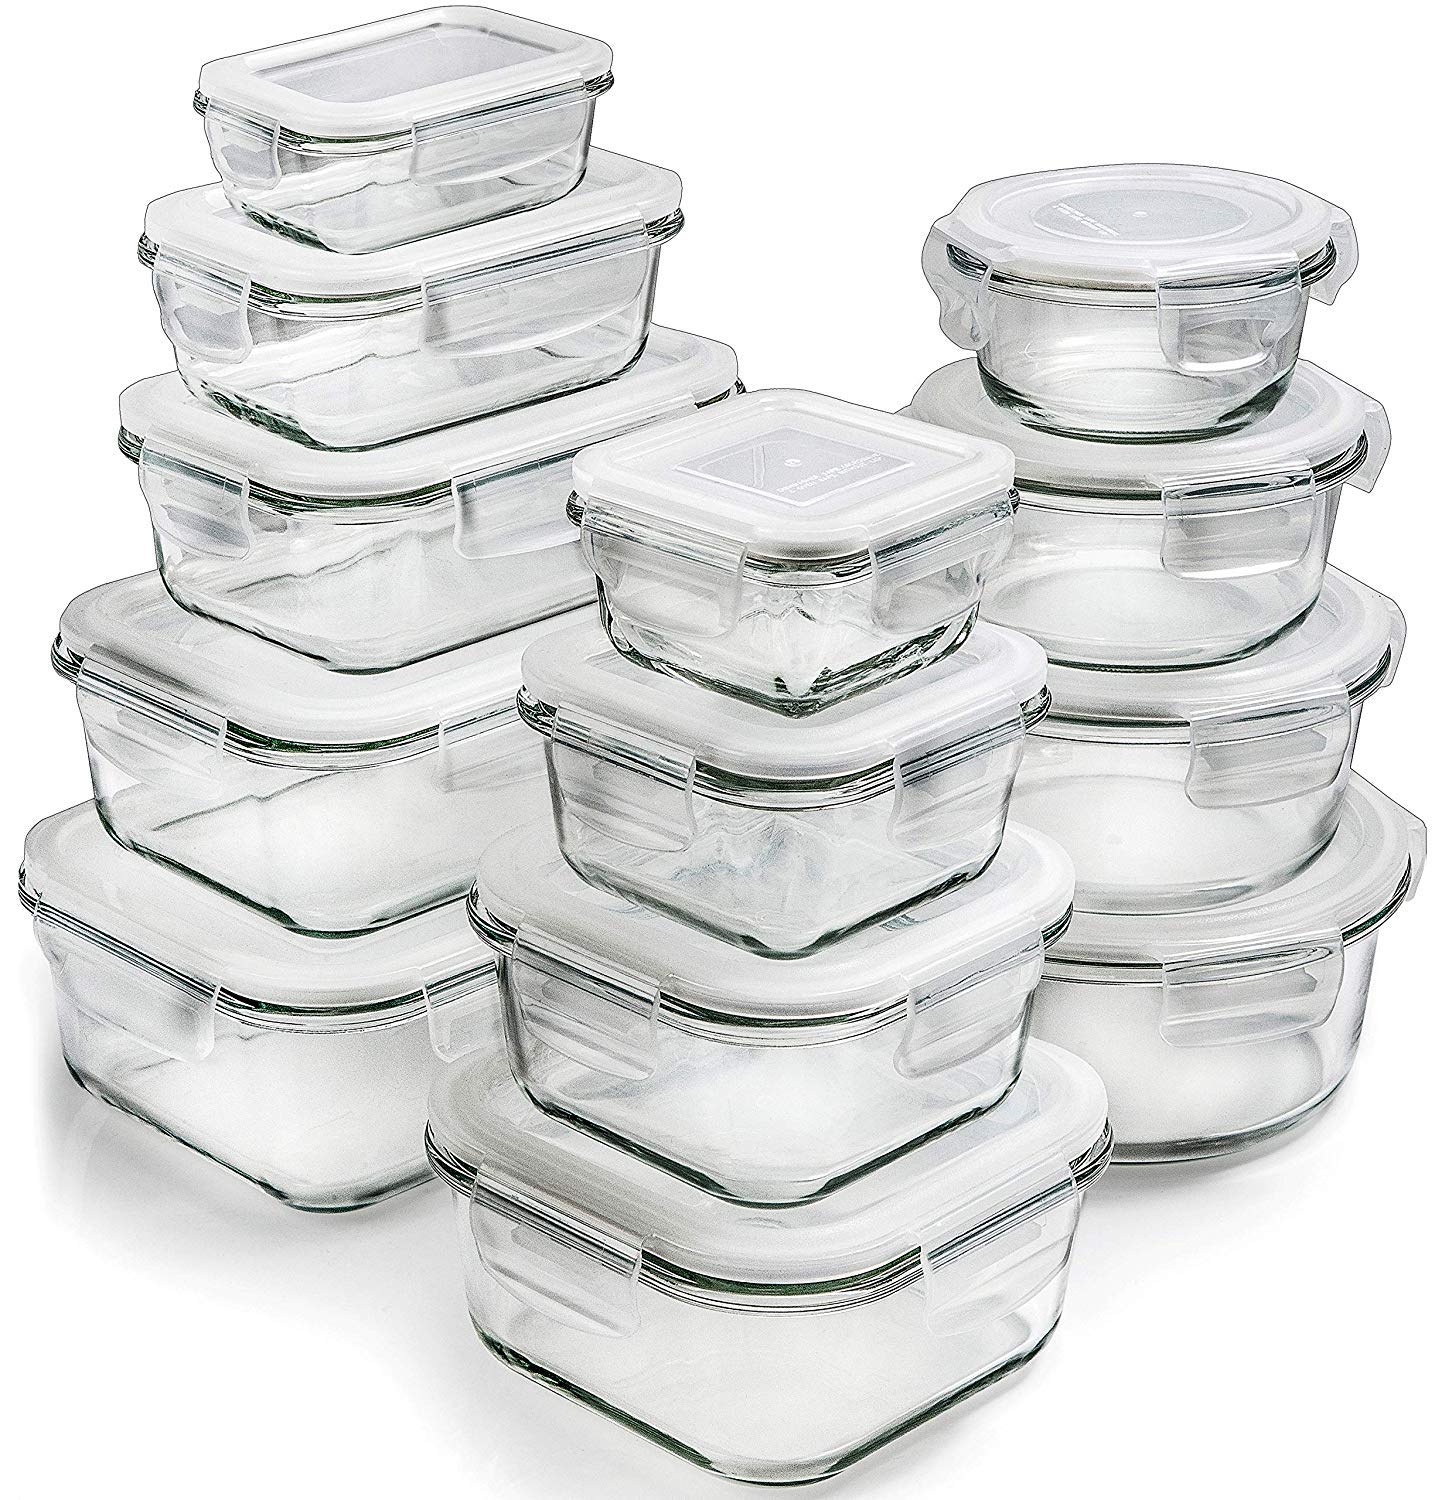 https://www.dontwasteyourmoney.com/wp-content/uploads/2019/10/prep-naturals-glass-storage-containers-with-lids-storage-for-leftovers.jpg